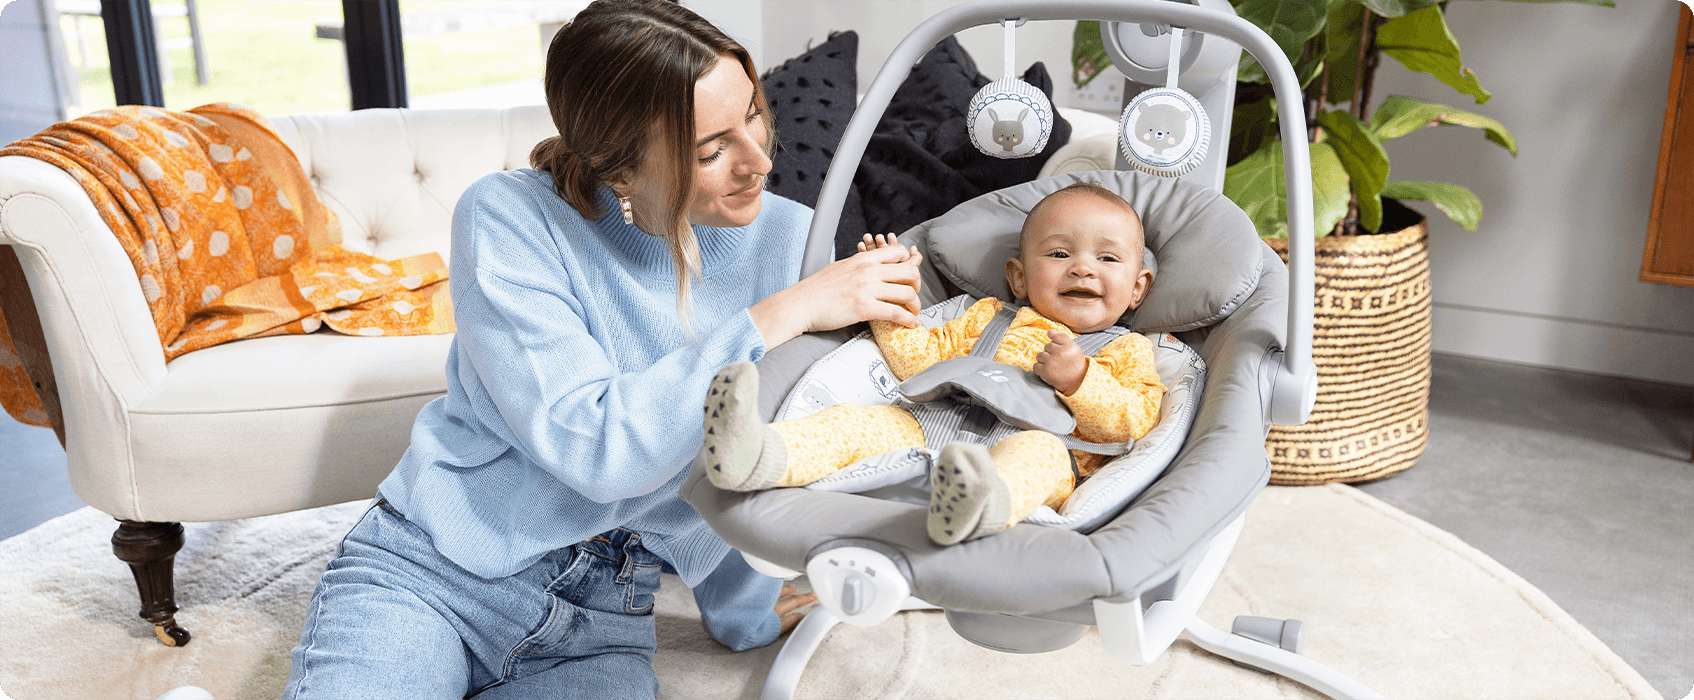 Mum sitting on the floor next to baby in the Joie Serina 2in1 baby swing